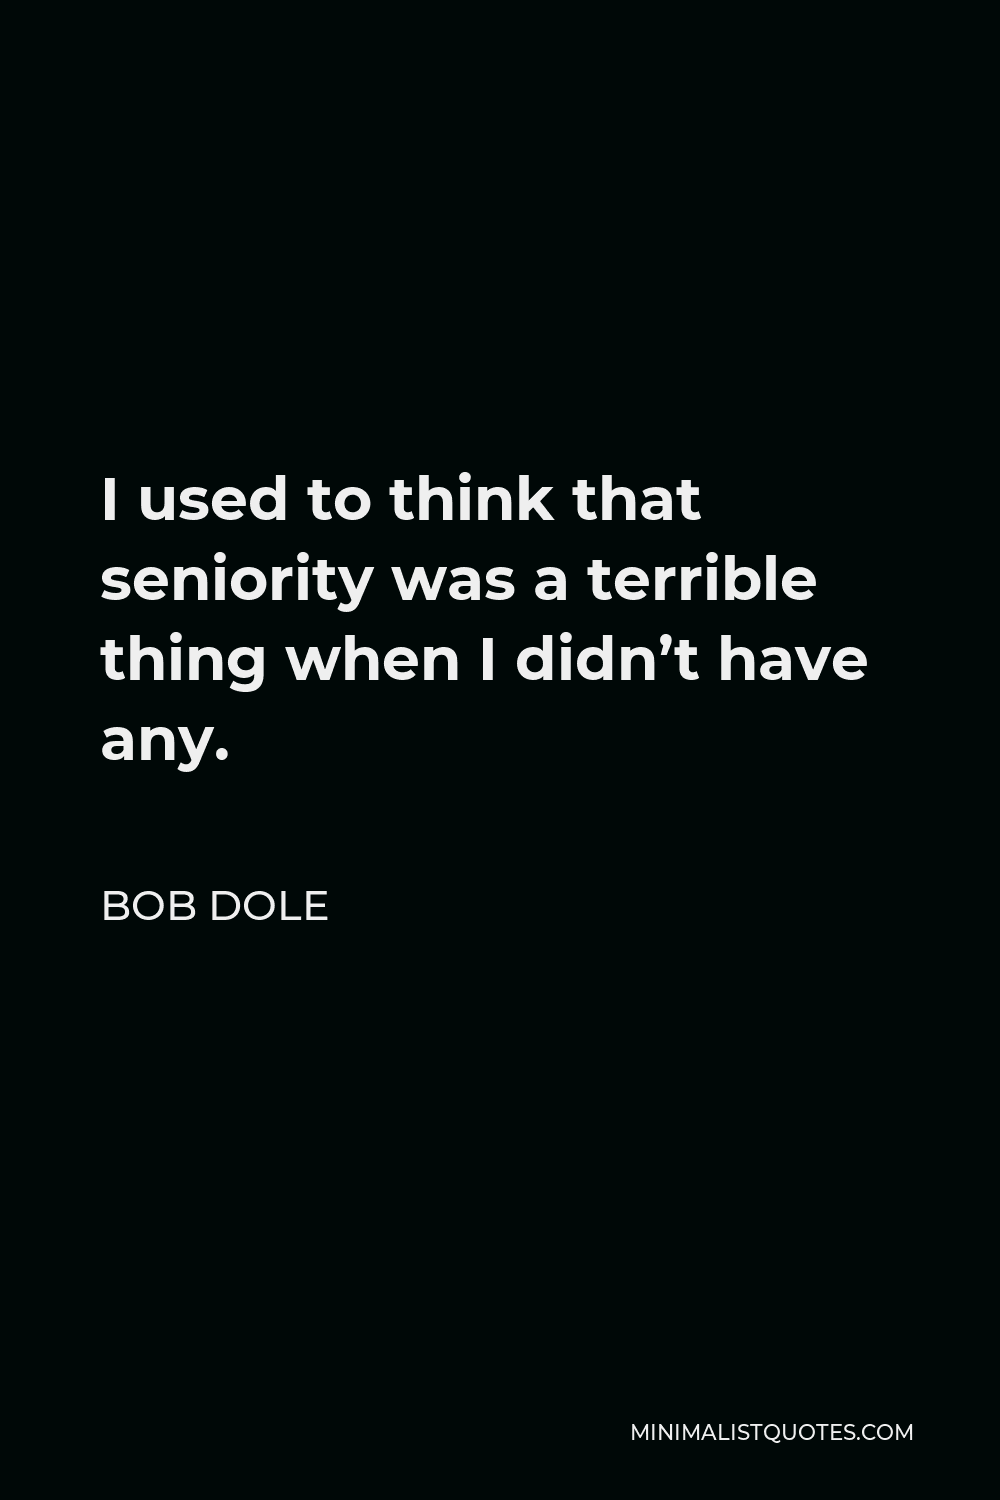 Bob Dole Quote - I used to think that seniority was a terrible thing when I didn’t have any.